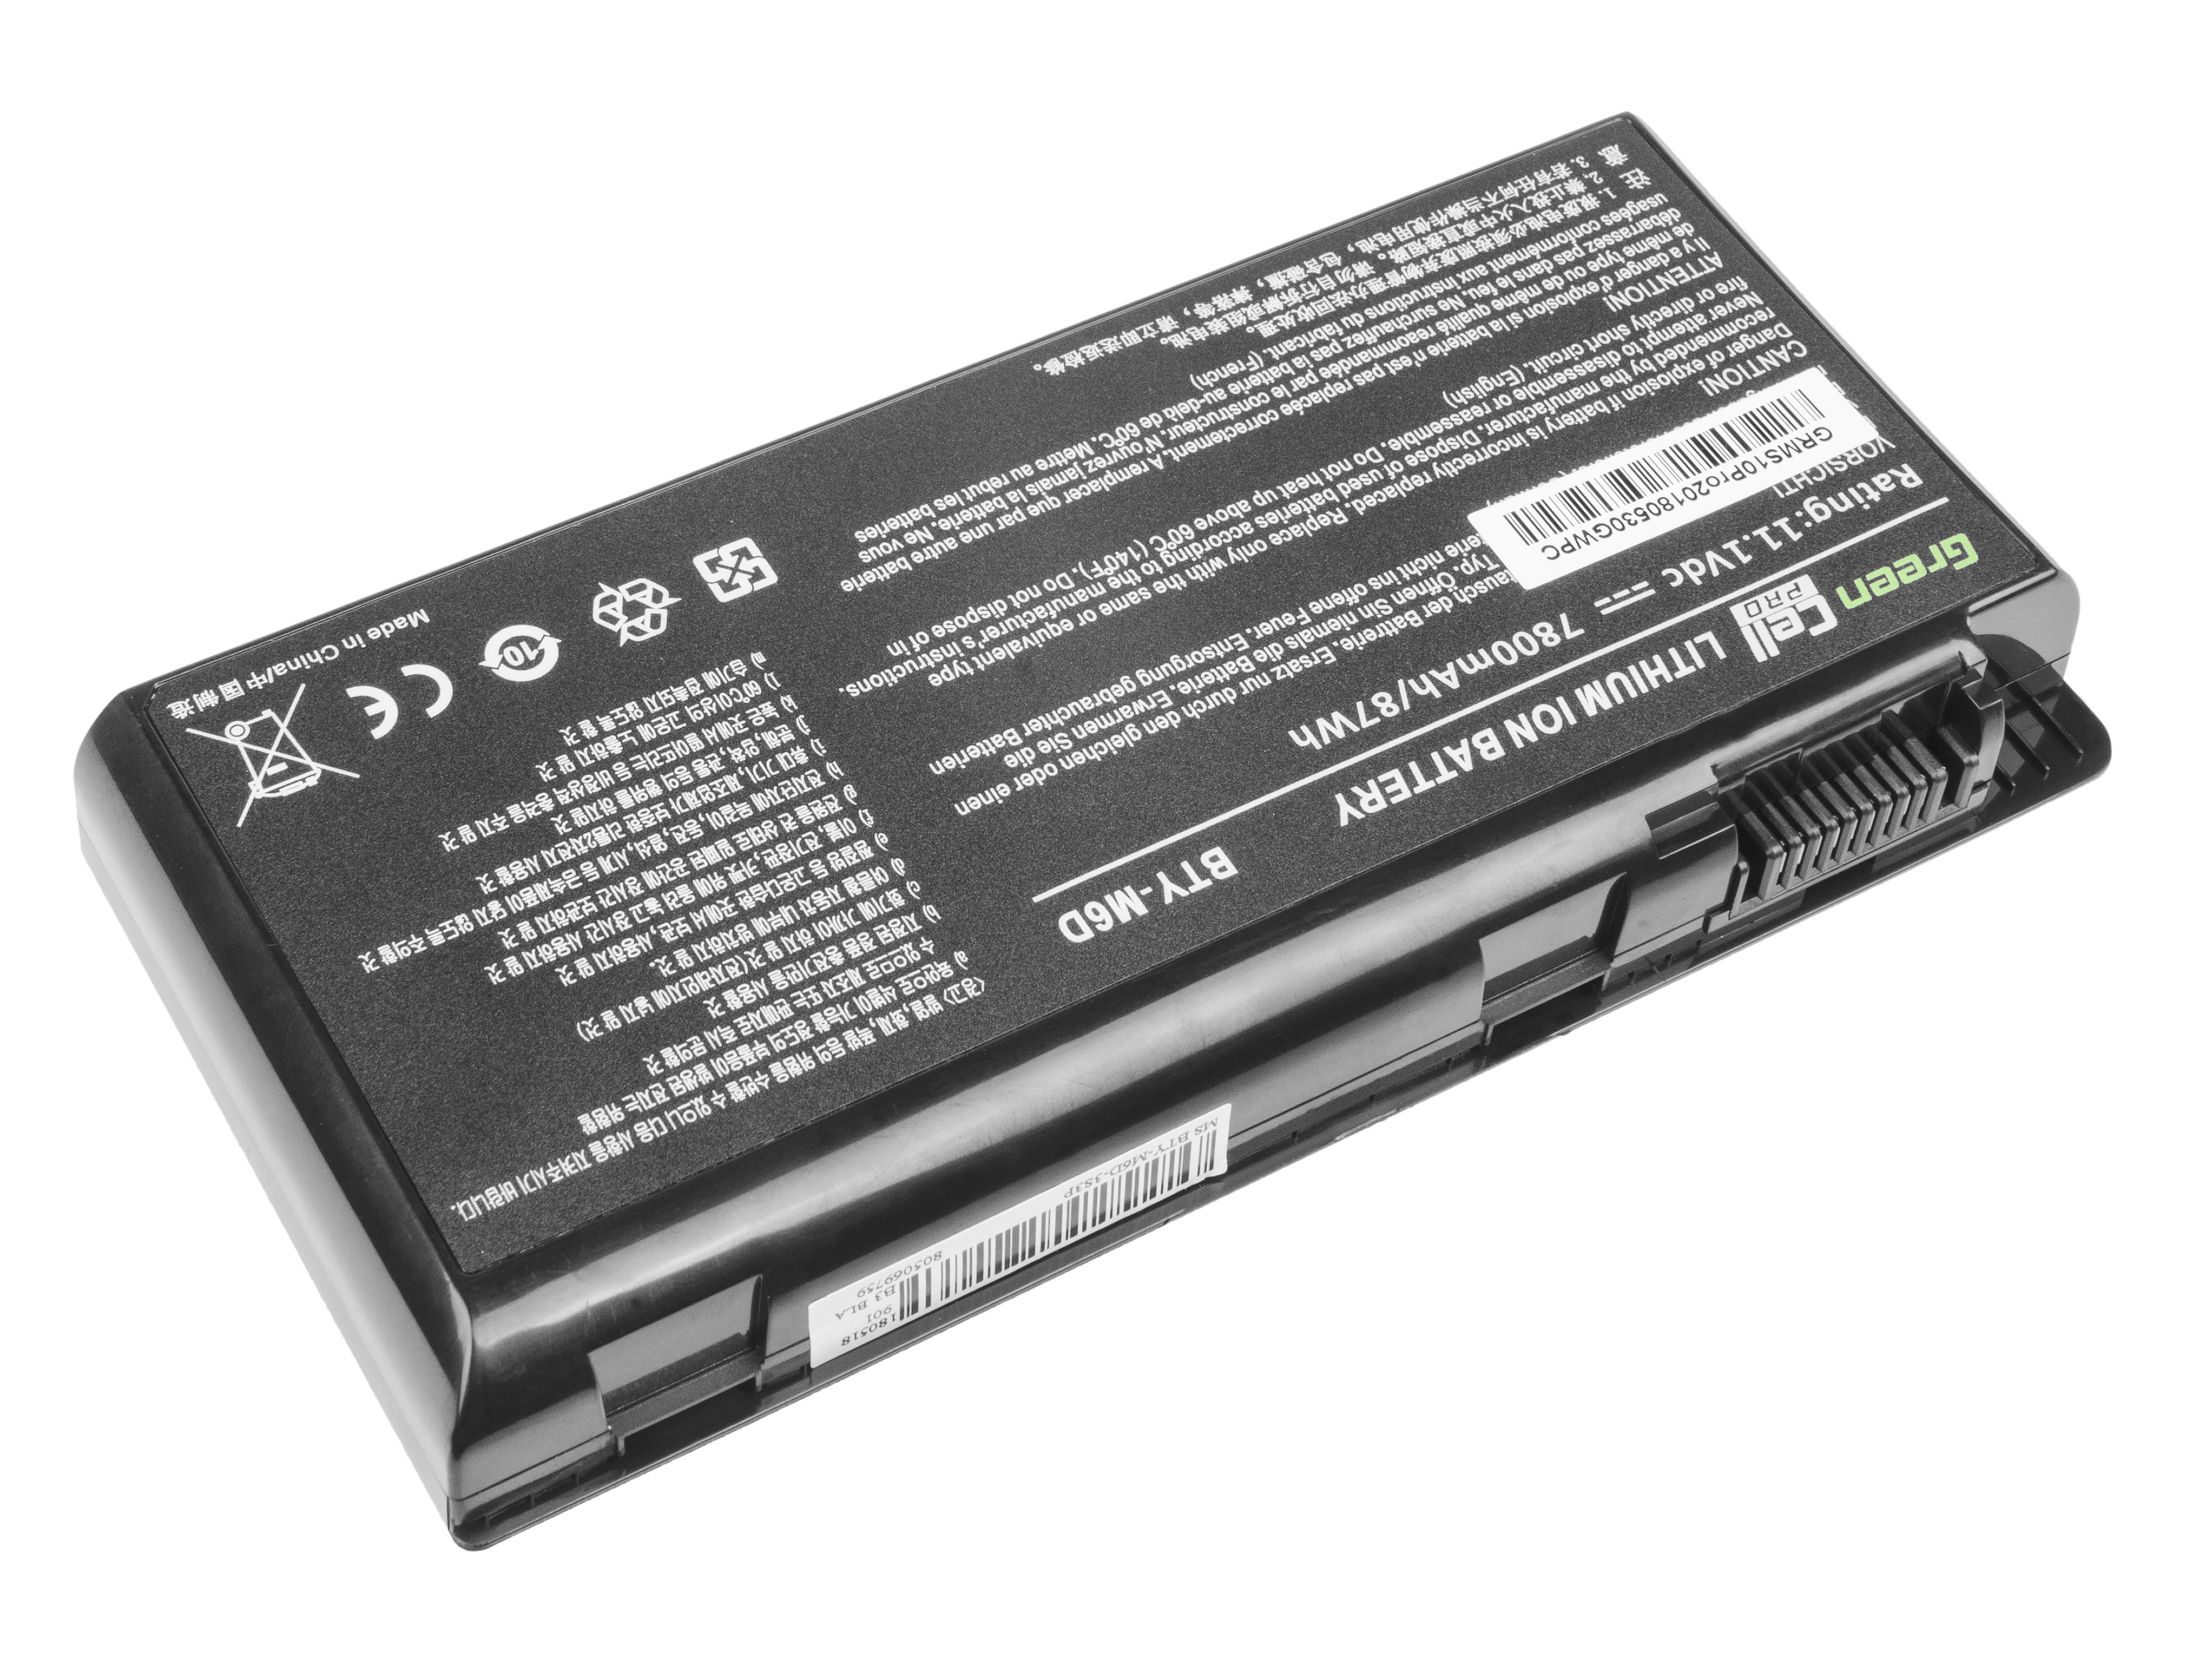 Green Cell MS10PRO Baterie MSI BTY-M6D do MSI GT60 GT70 GT660 GT680 GT683 GT780 GT783 GX660 GX680 GX780 7800mAh Li-ion